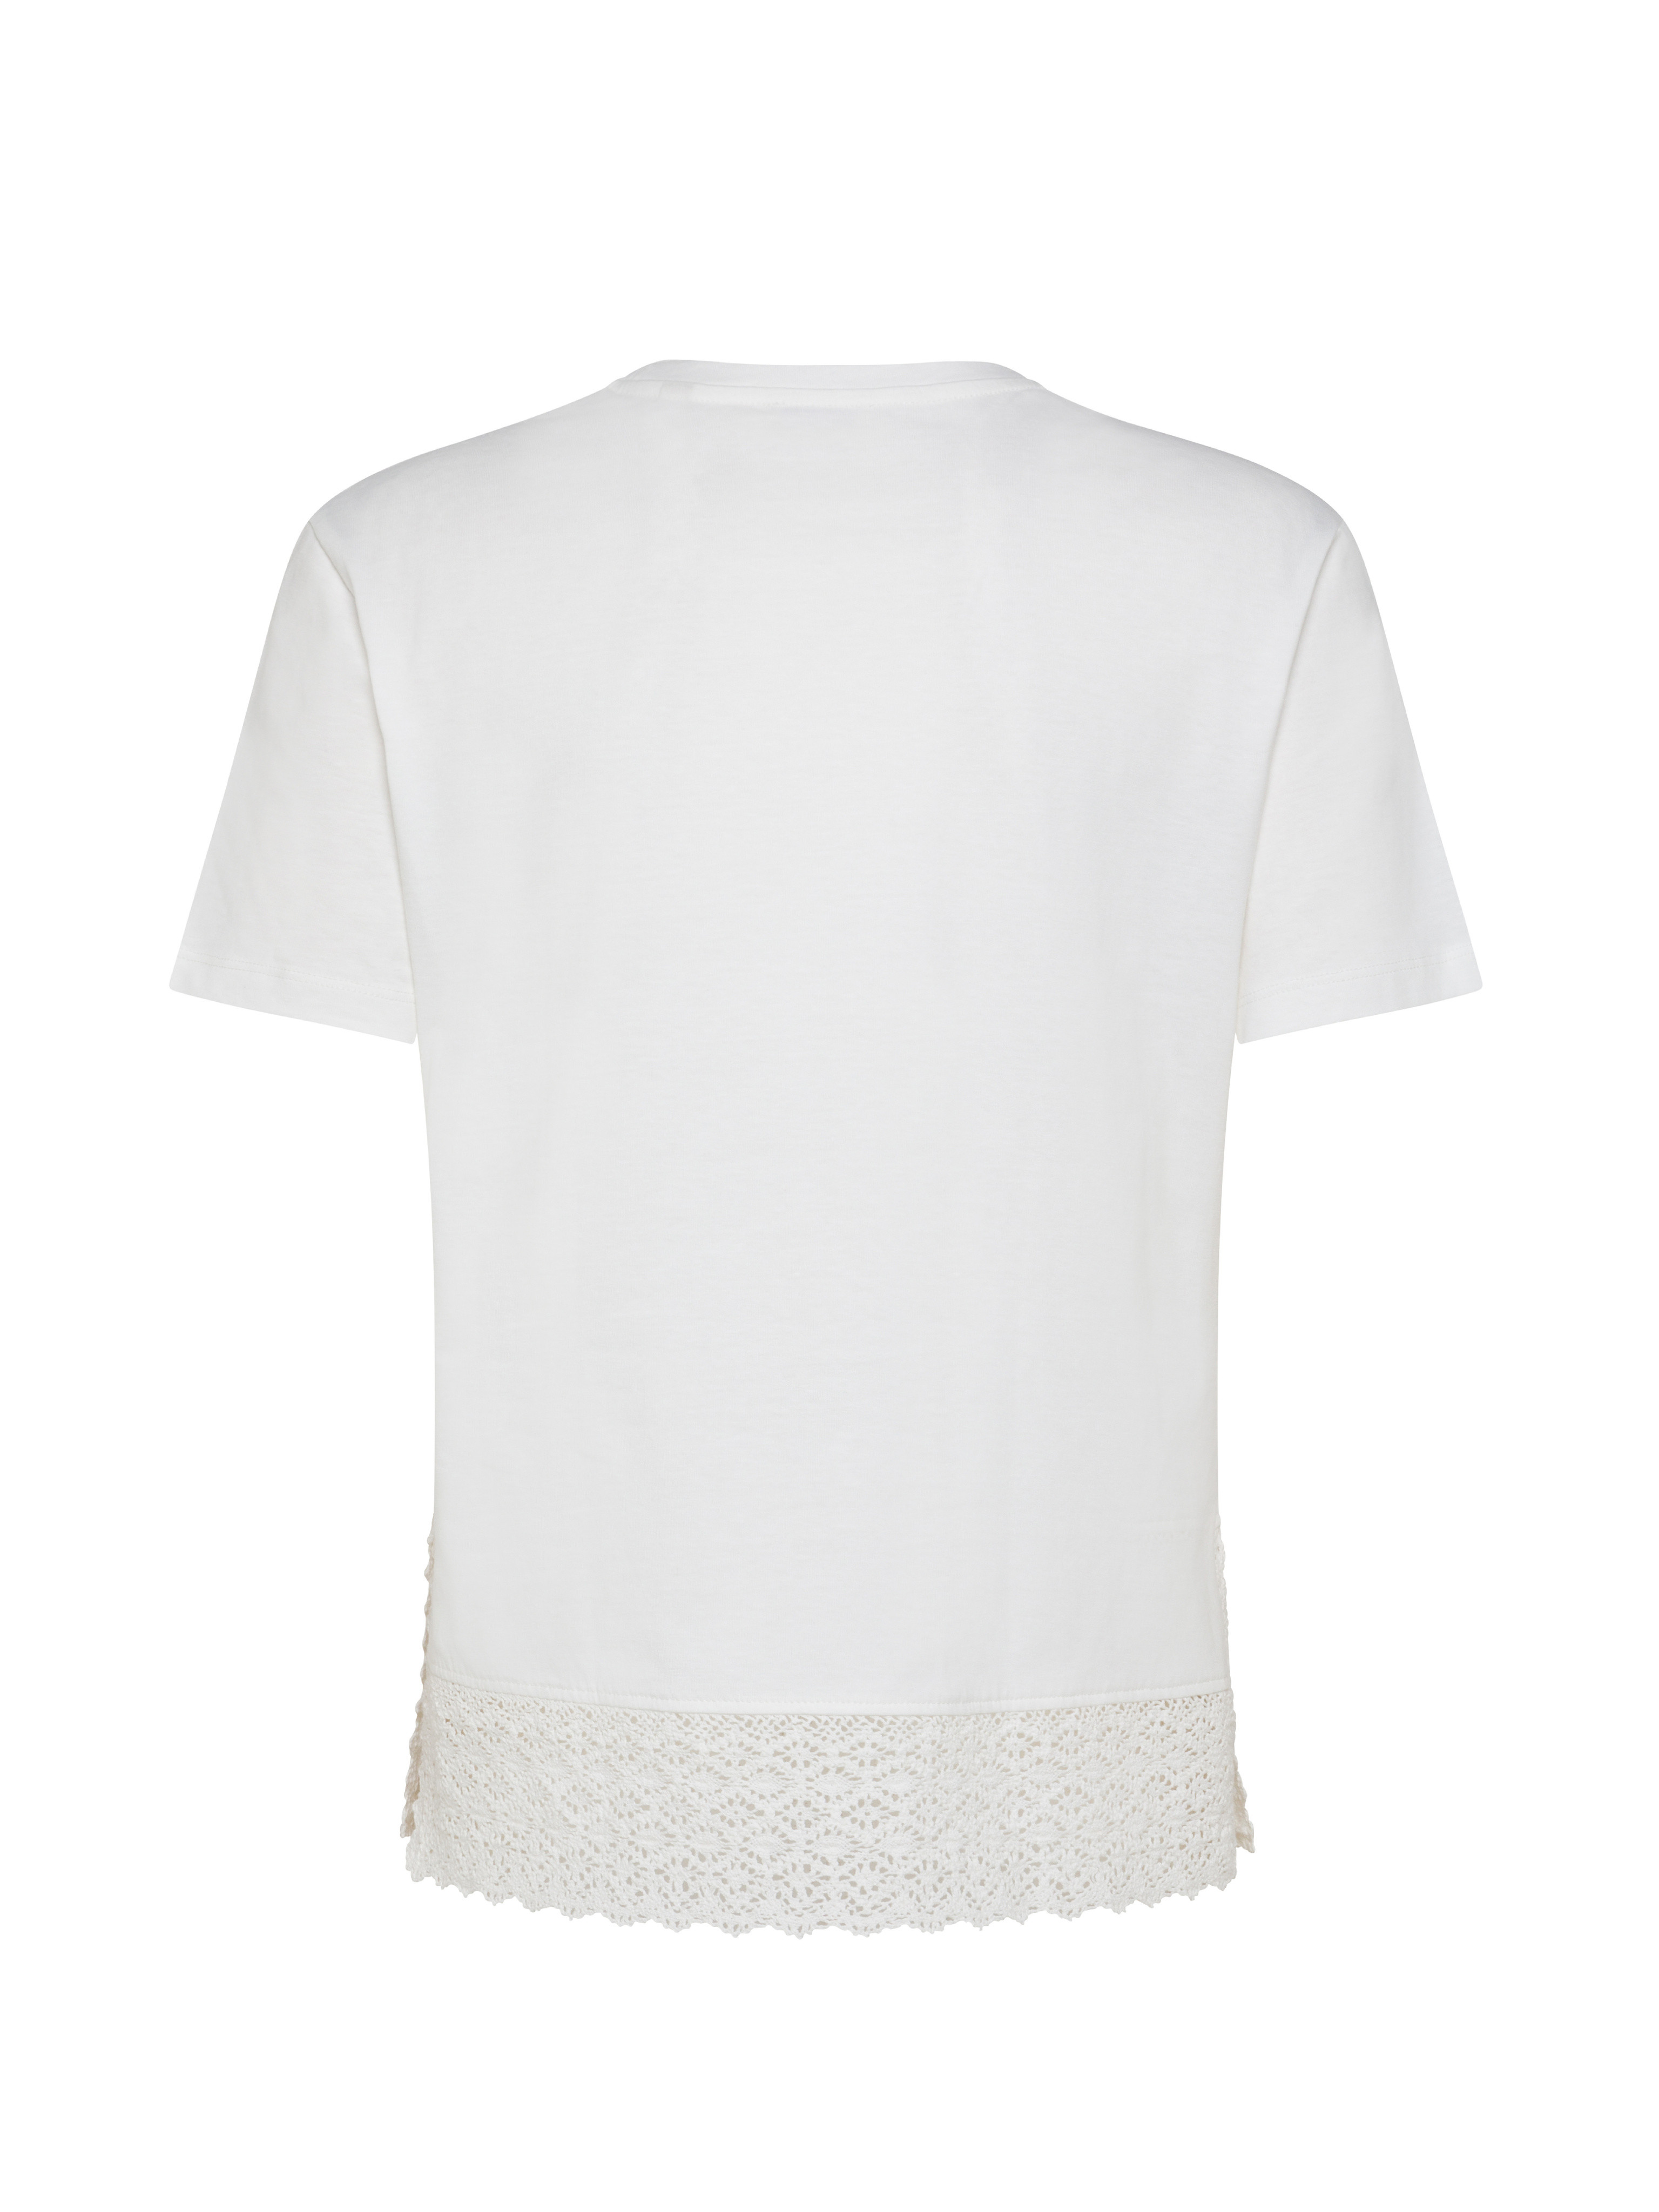 Esprit - T-shirt in cotone, Bianco, large image number 1